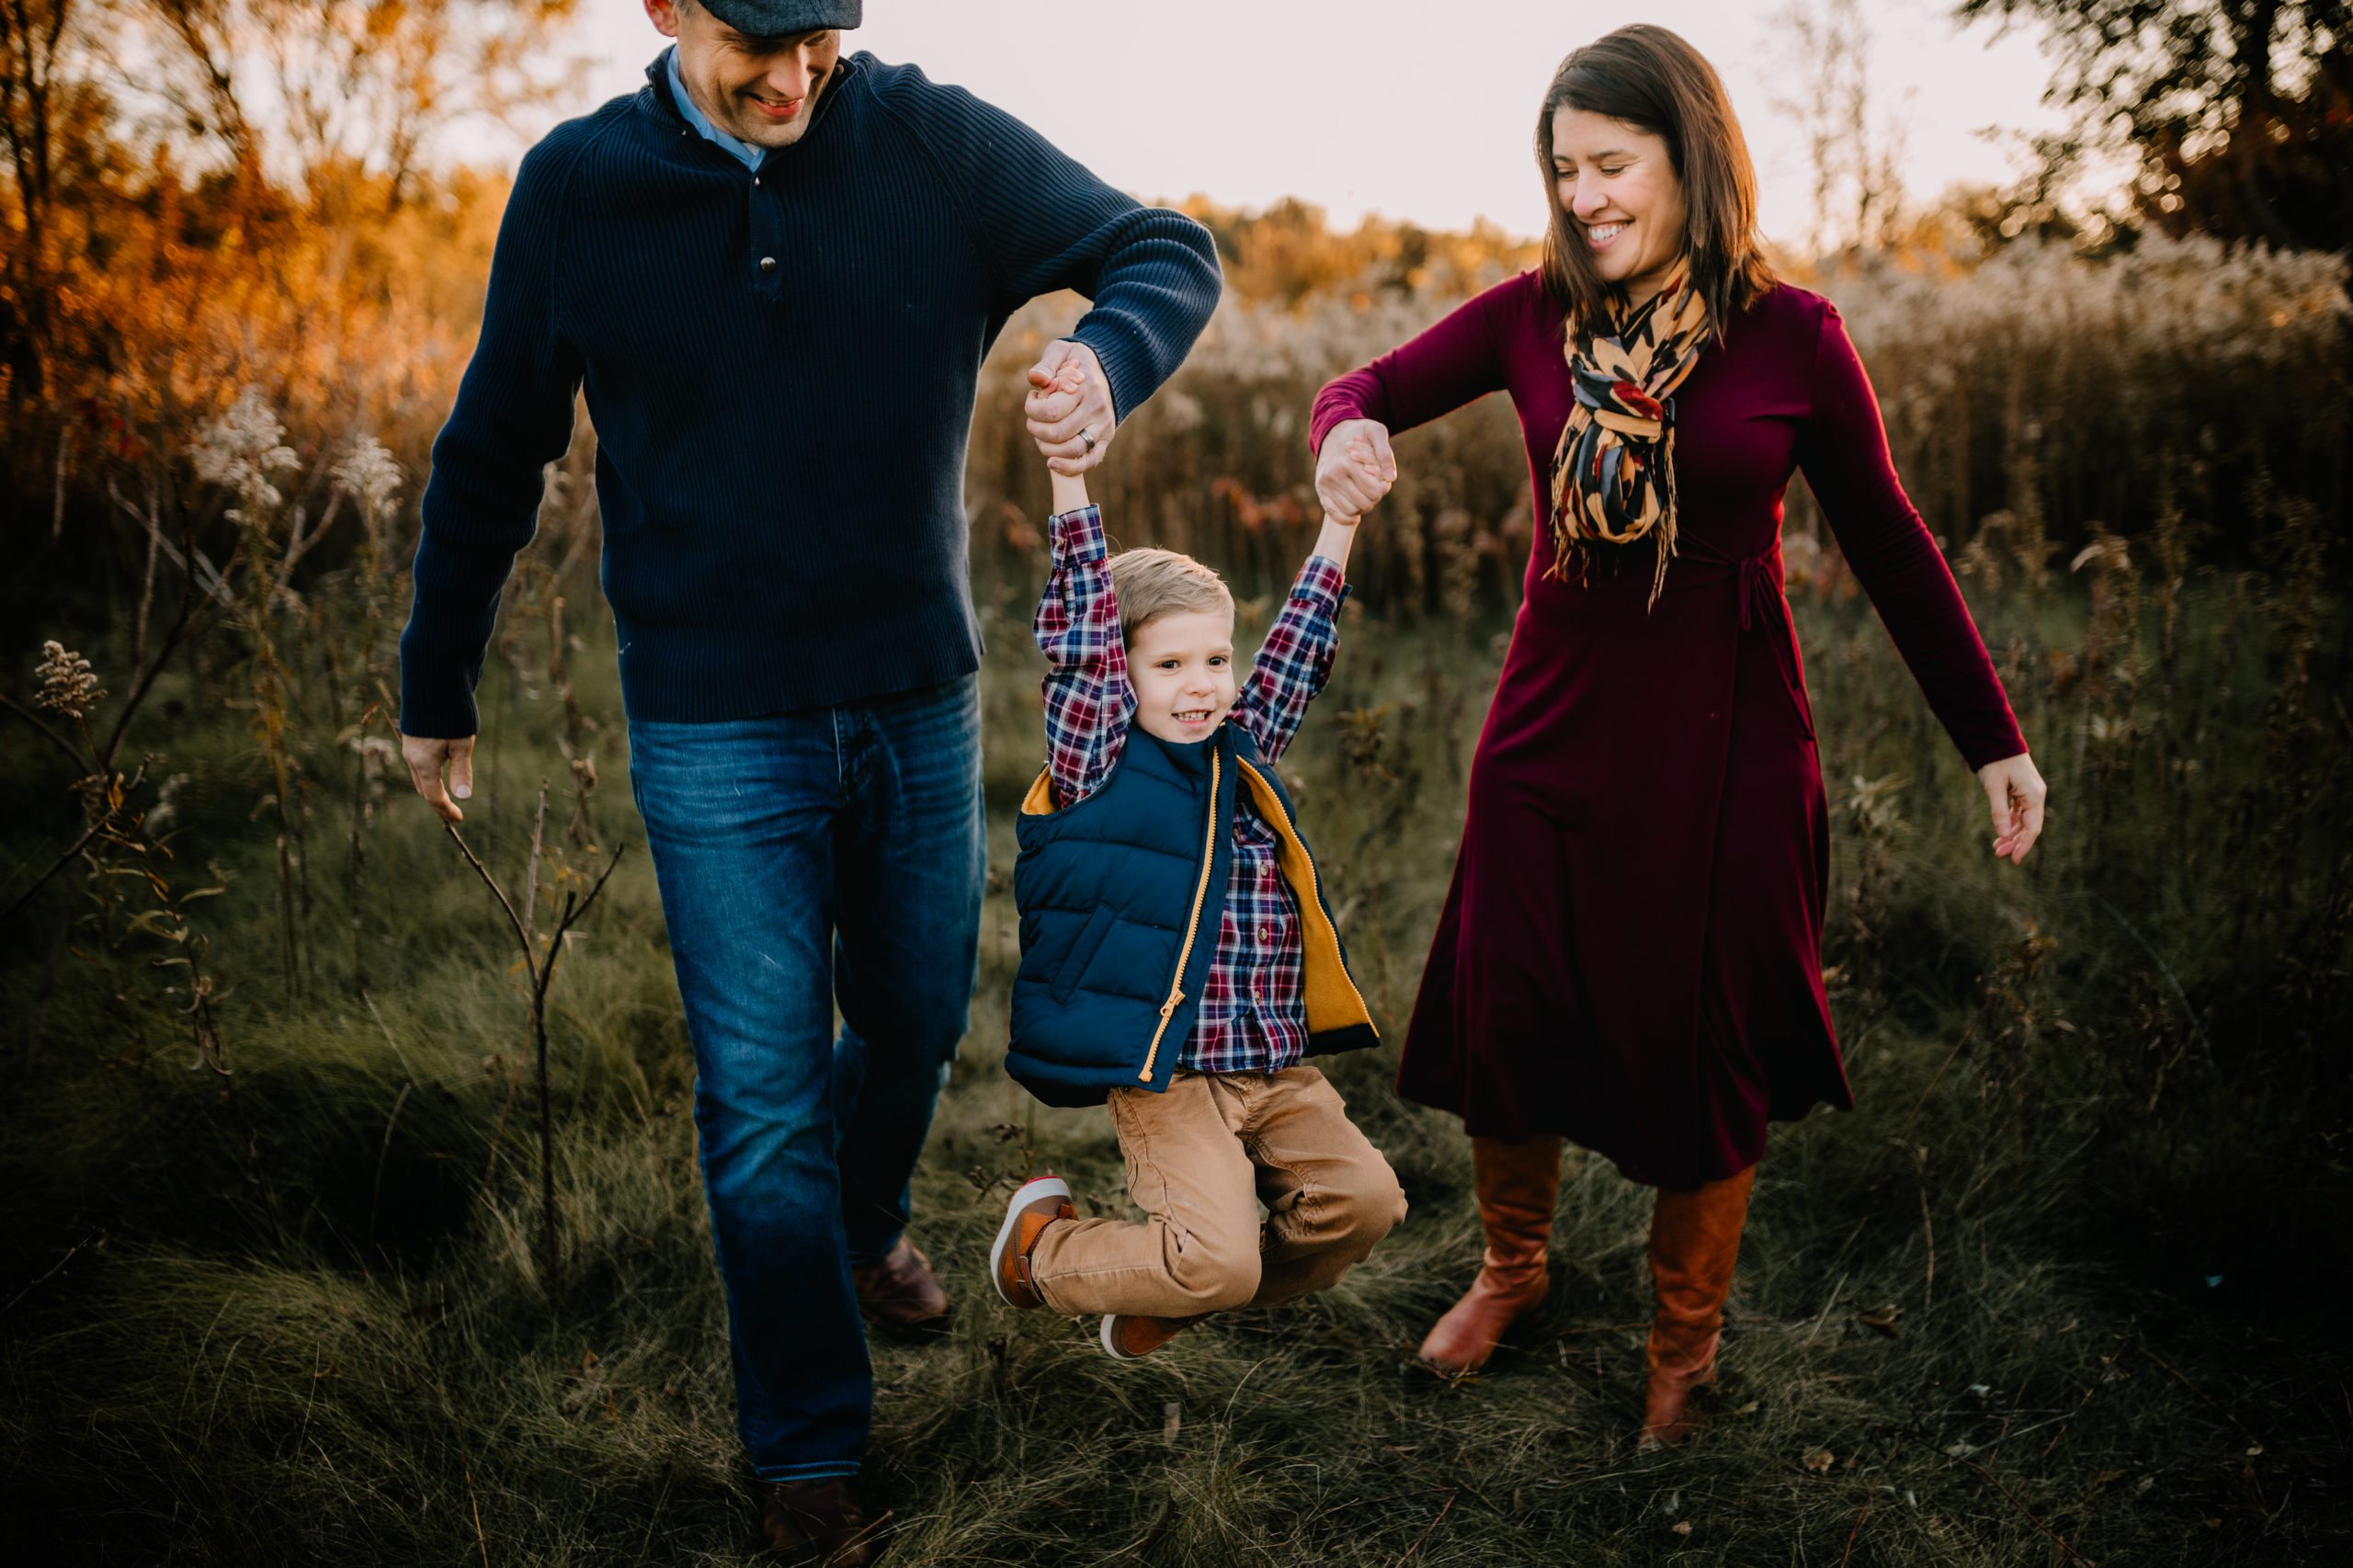 Fall mini session near Madison, WI taken by Infinity Images Photography